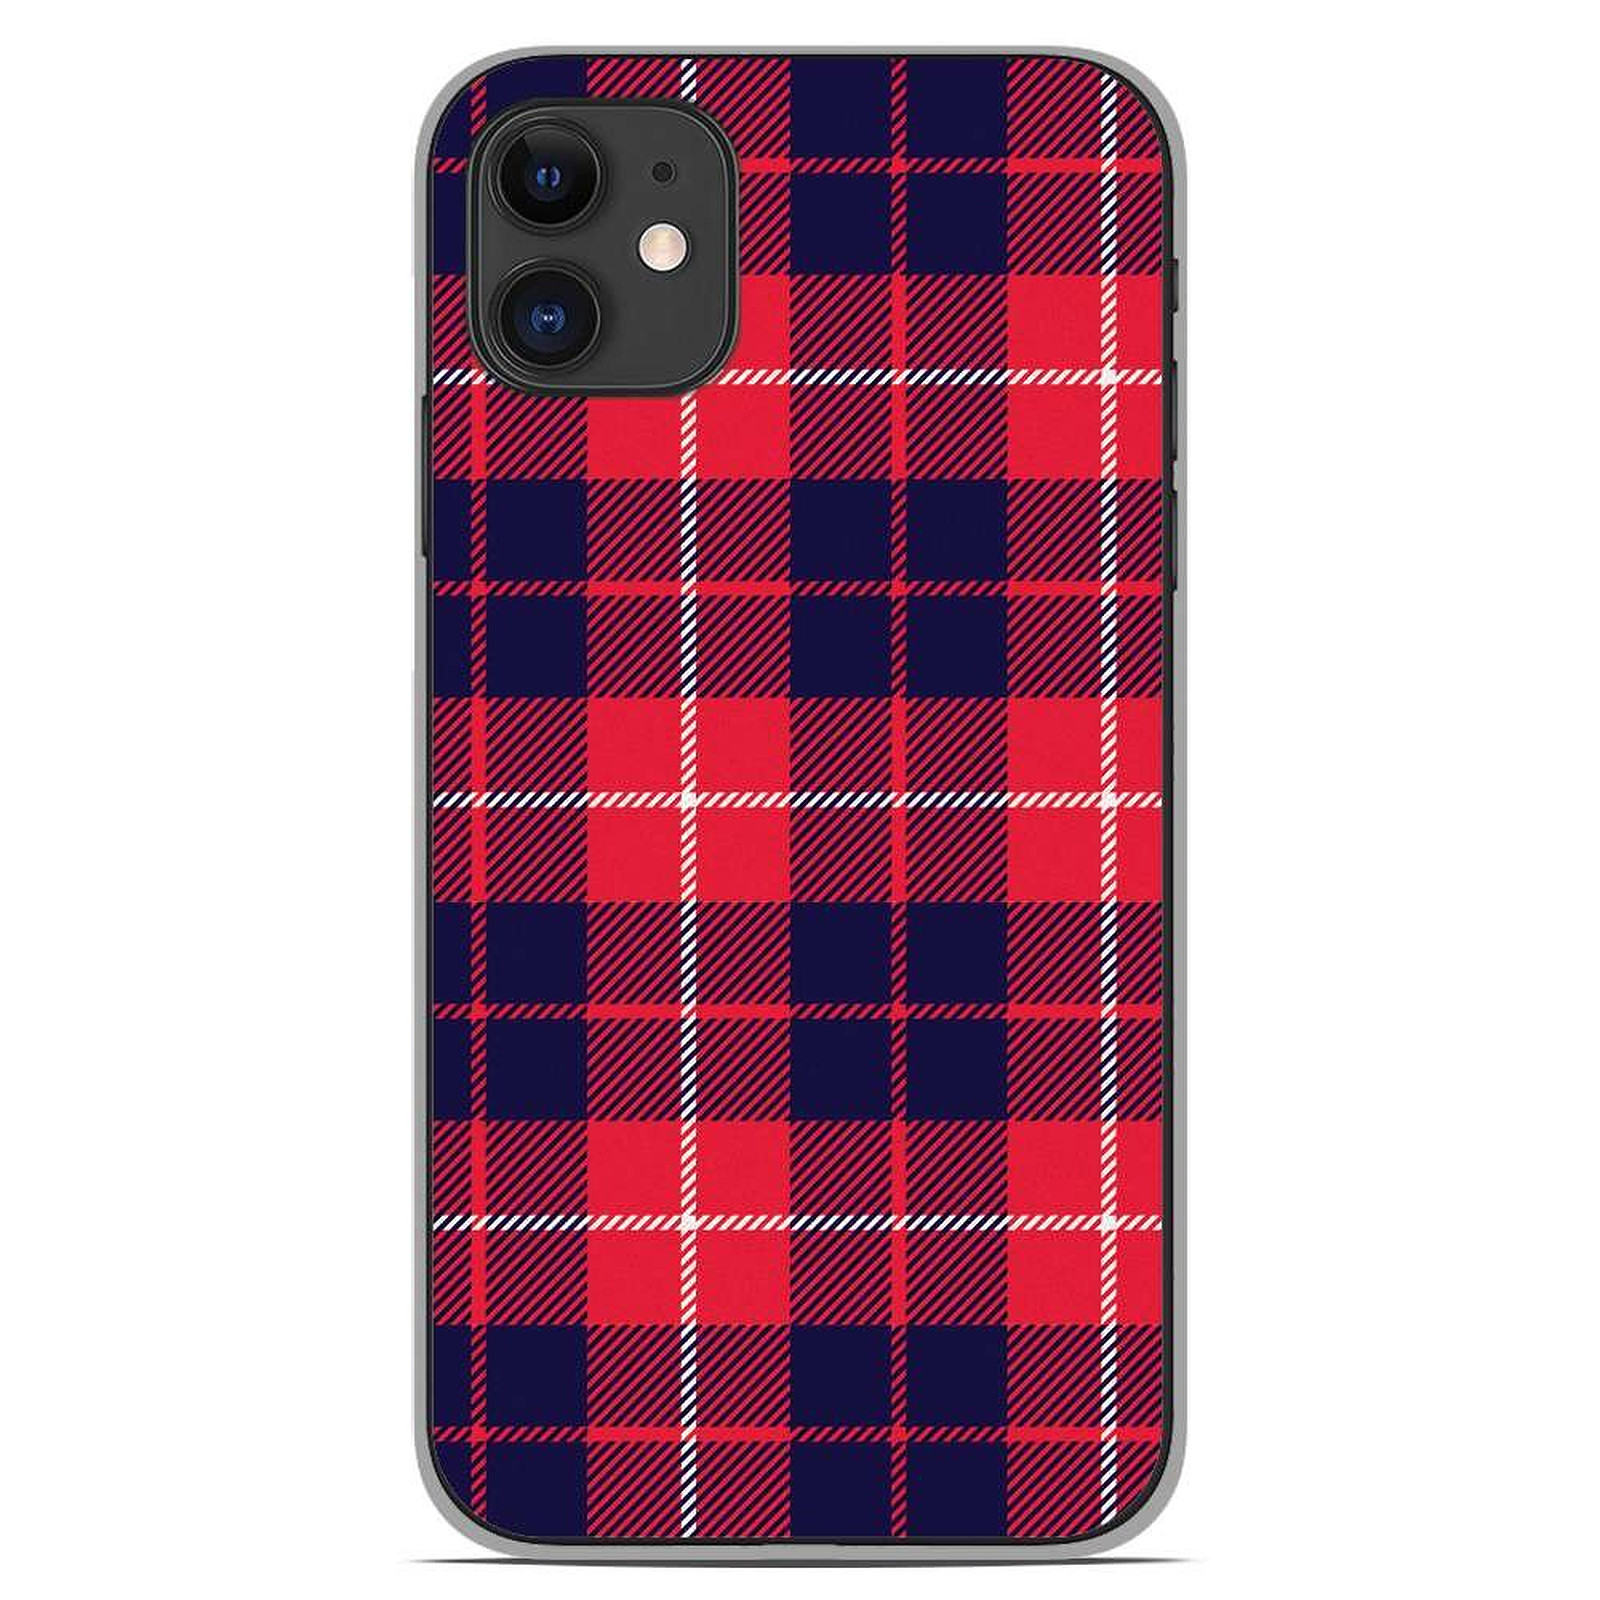 1001 Coques Coque silicone gel Apple iPhone 11 motif Tartan Rouge 2 - Coque telephone 1001Coques